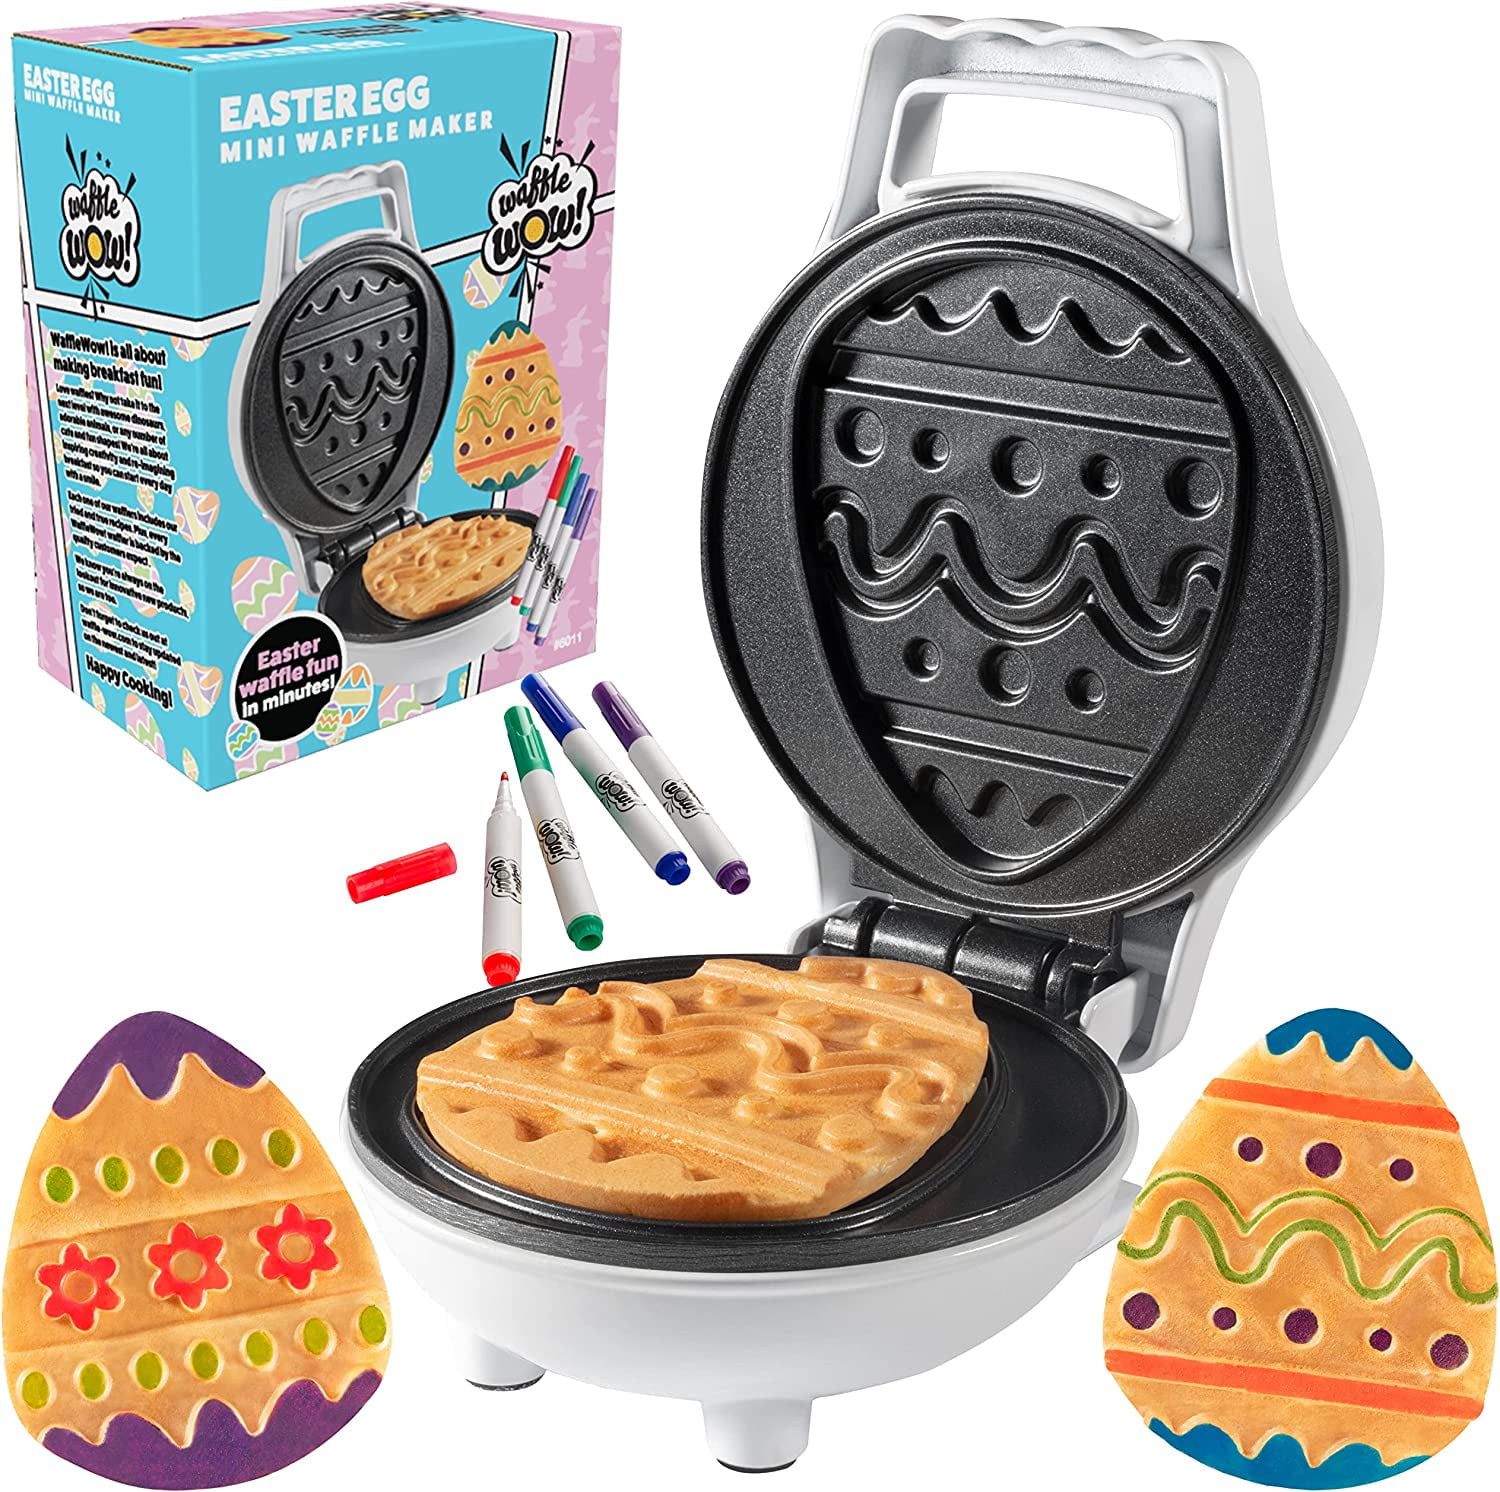 Building Brick Electric Waffle Maker- Cook Fun, Buildable Waffles, Pancakes  in Minutes - Build Houses, Cars 